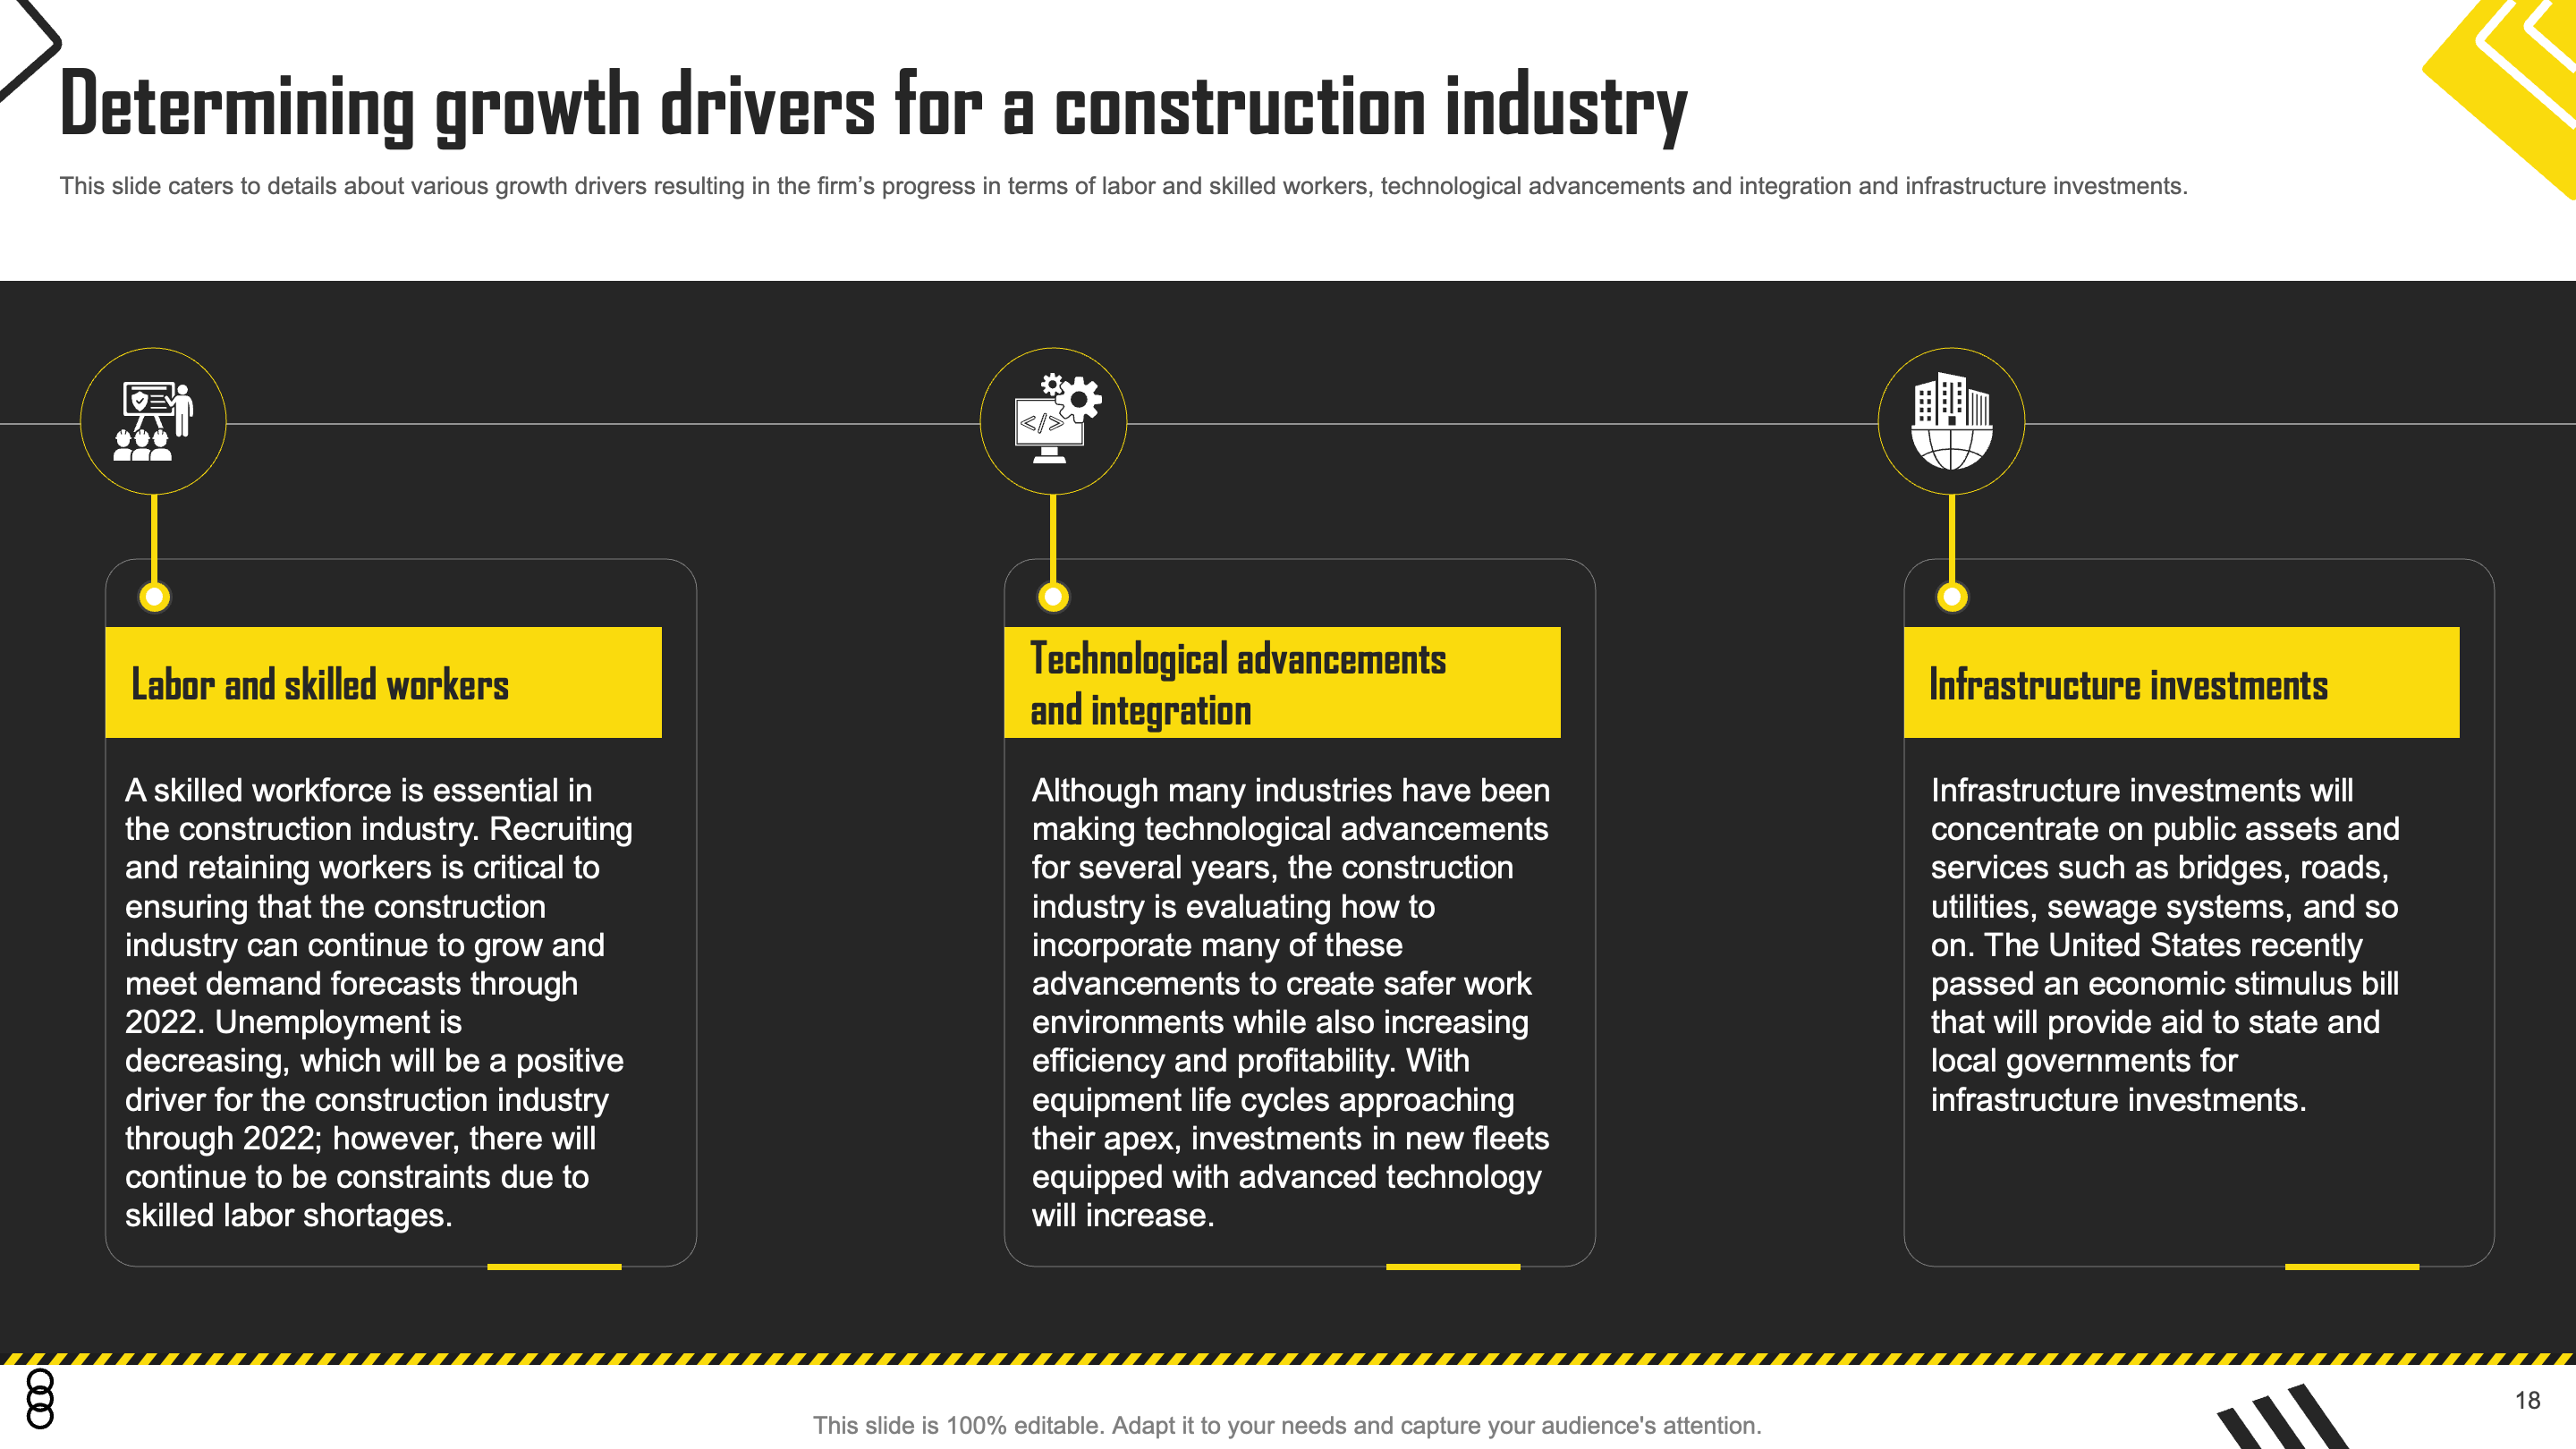 Determining Growth Drivers for a Construction Industry